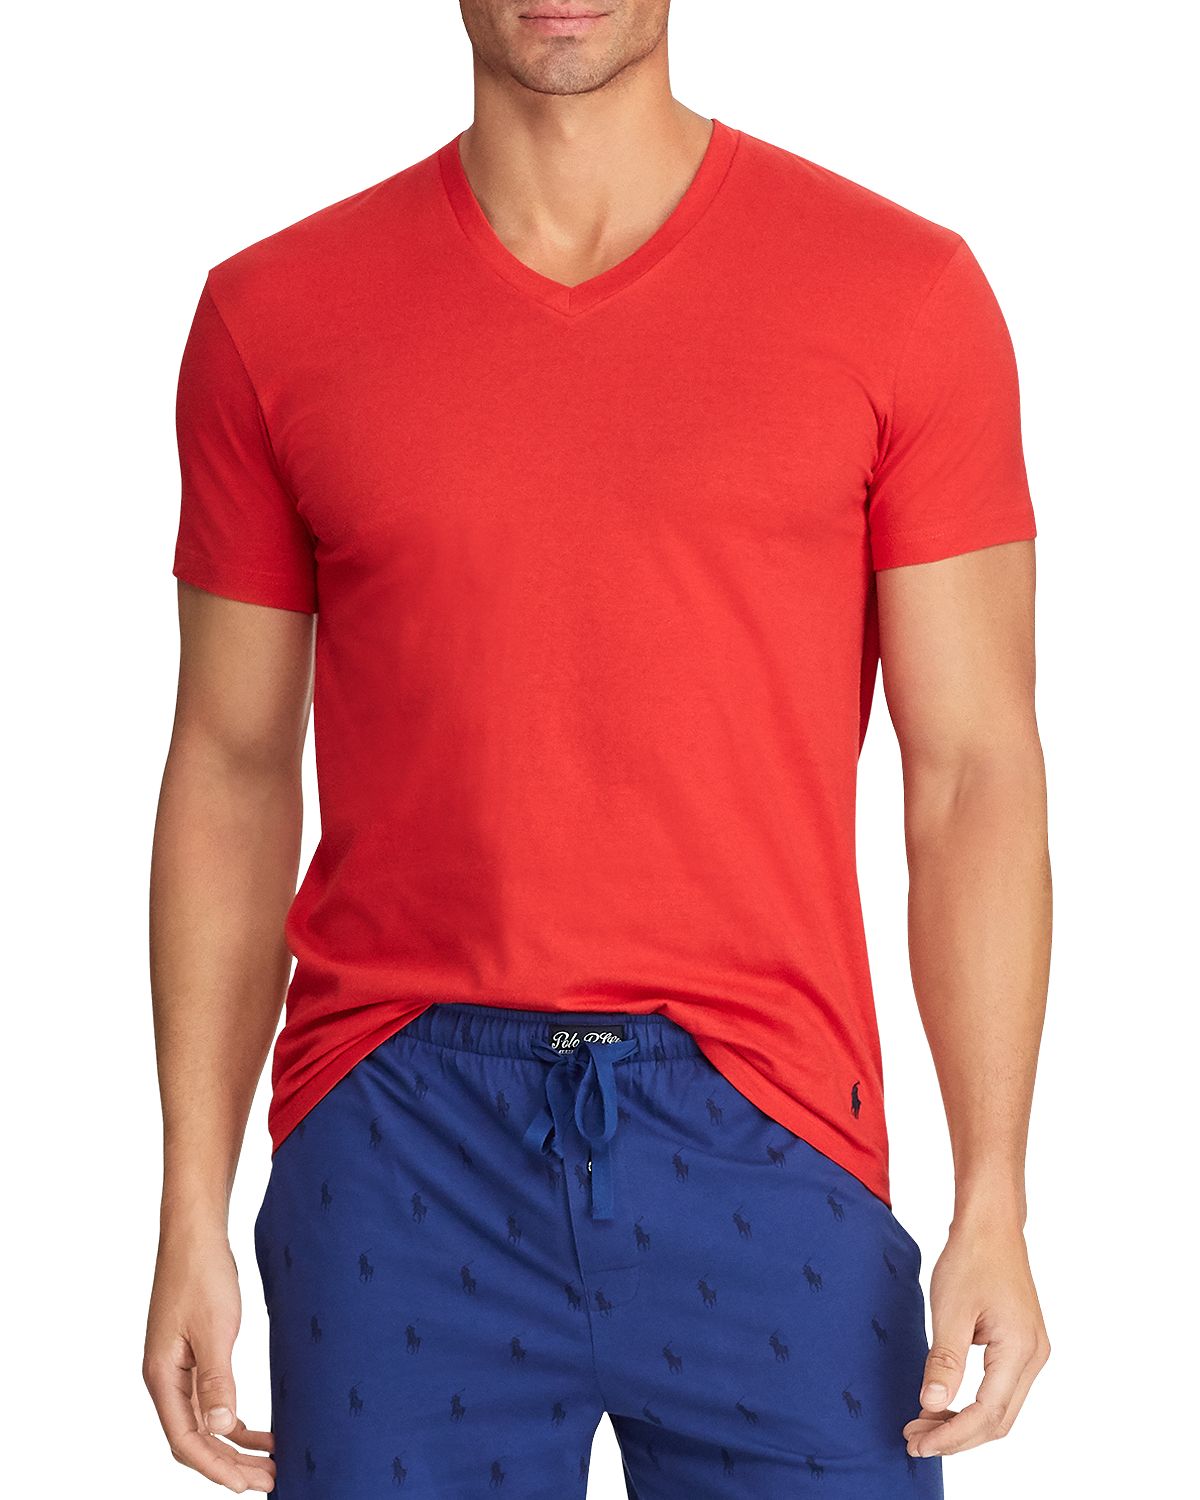 Polo Ralph Lauren Wicking 3 Pack V-neck Classic Fit Tee Red/Blue/Navy